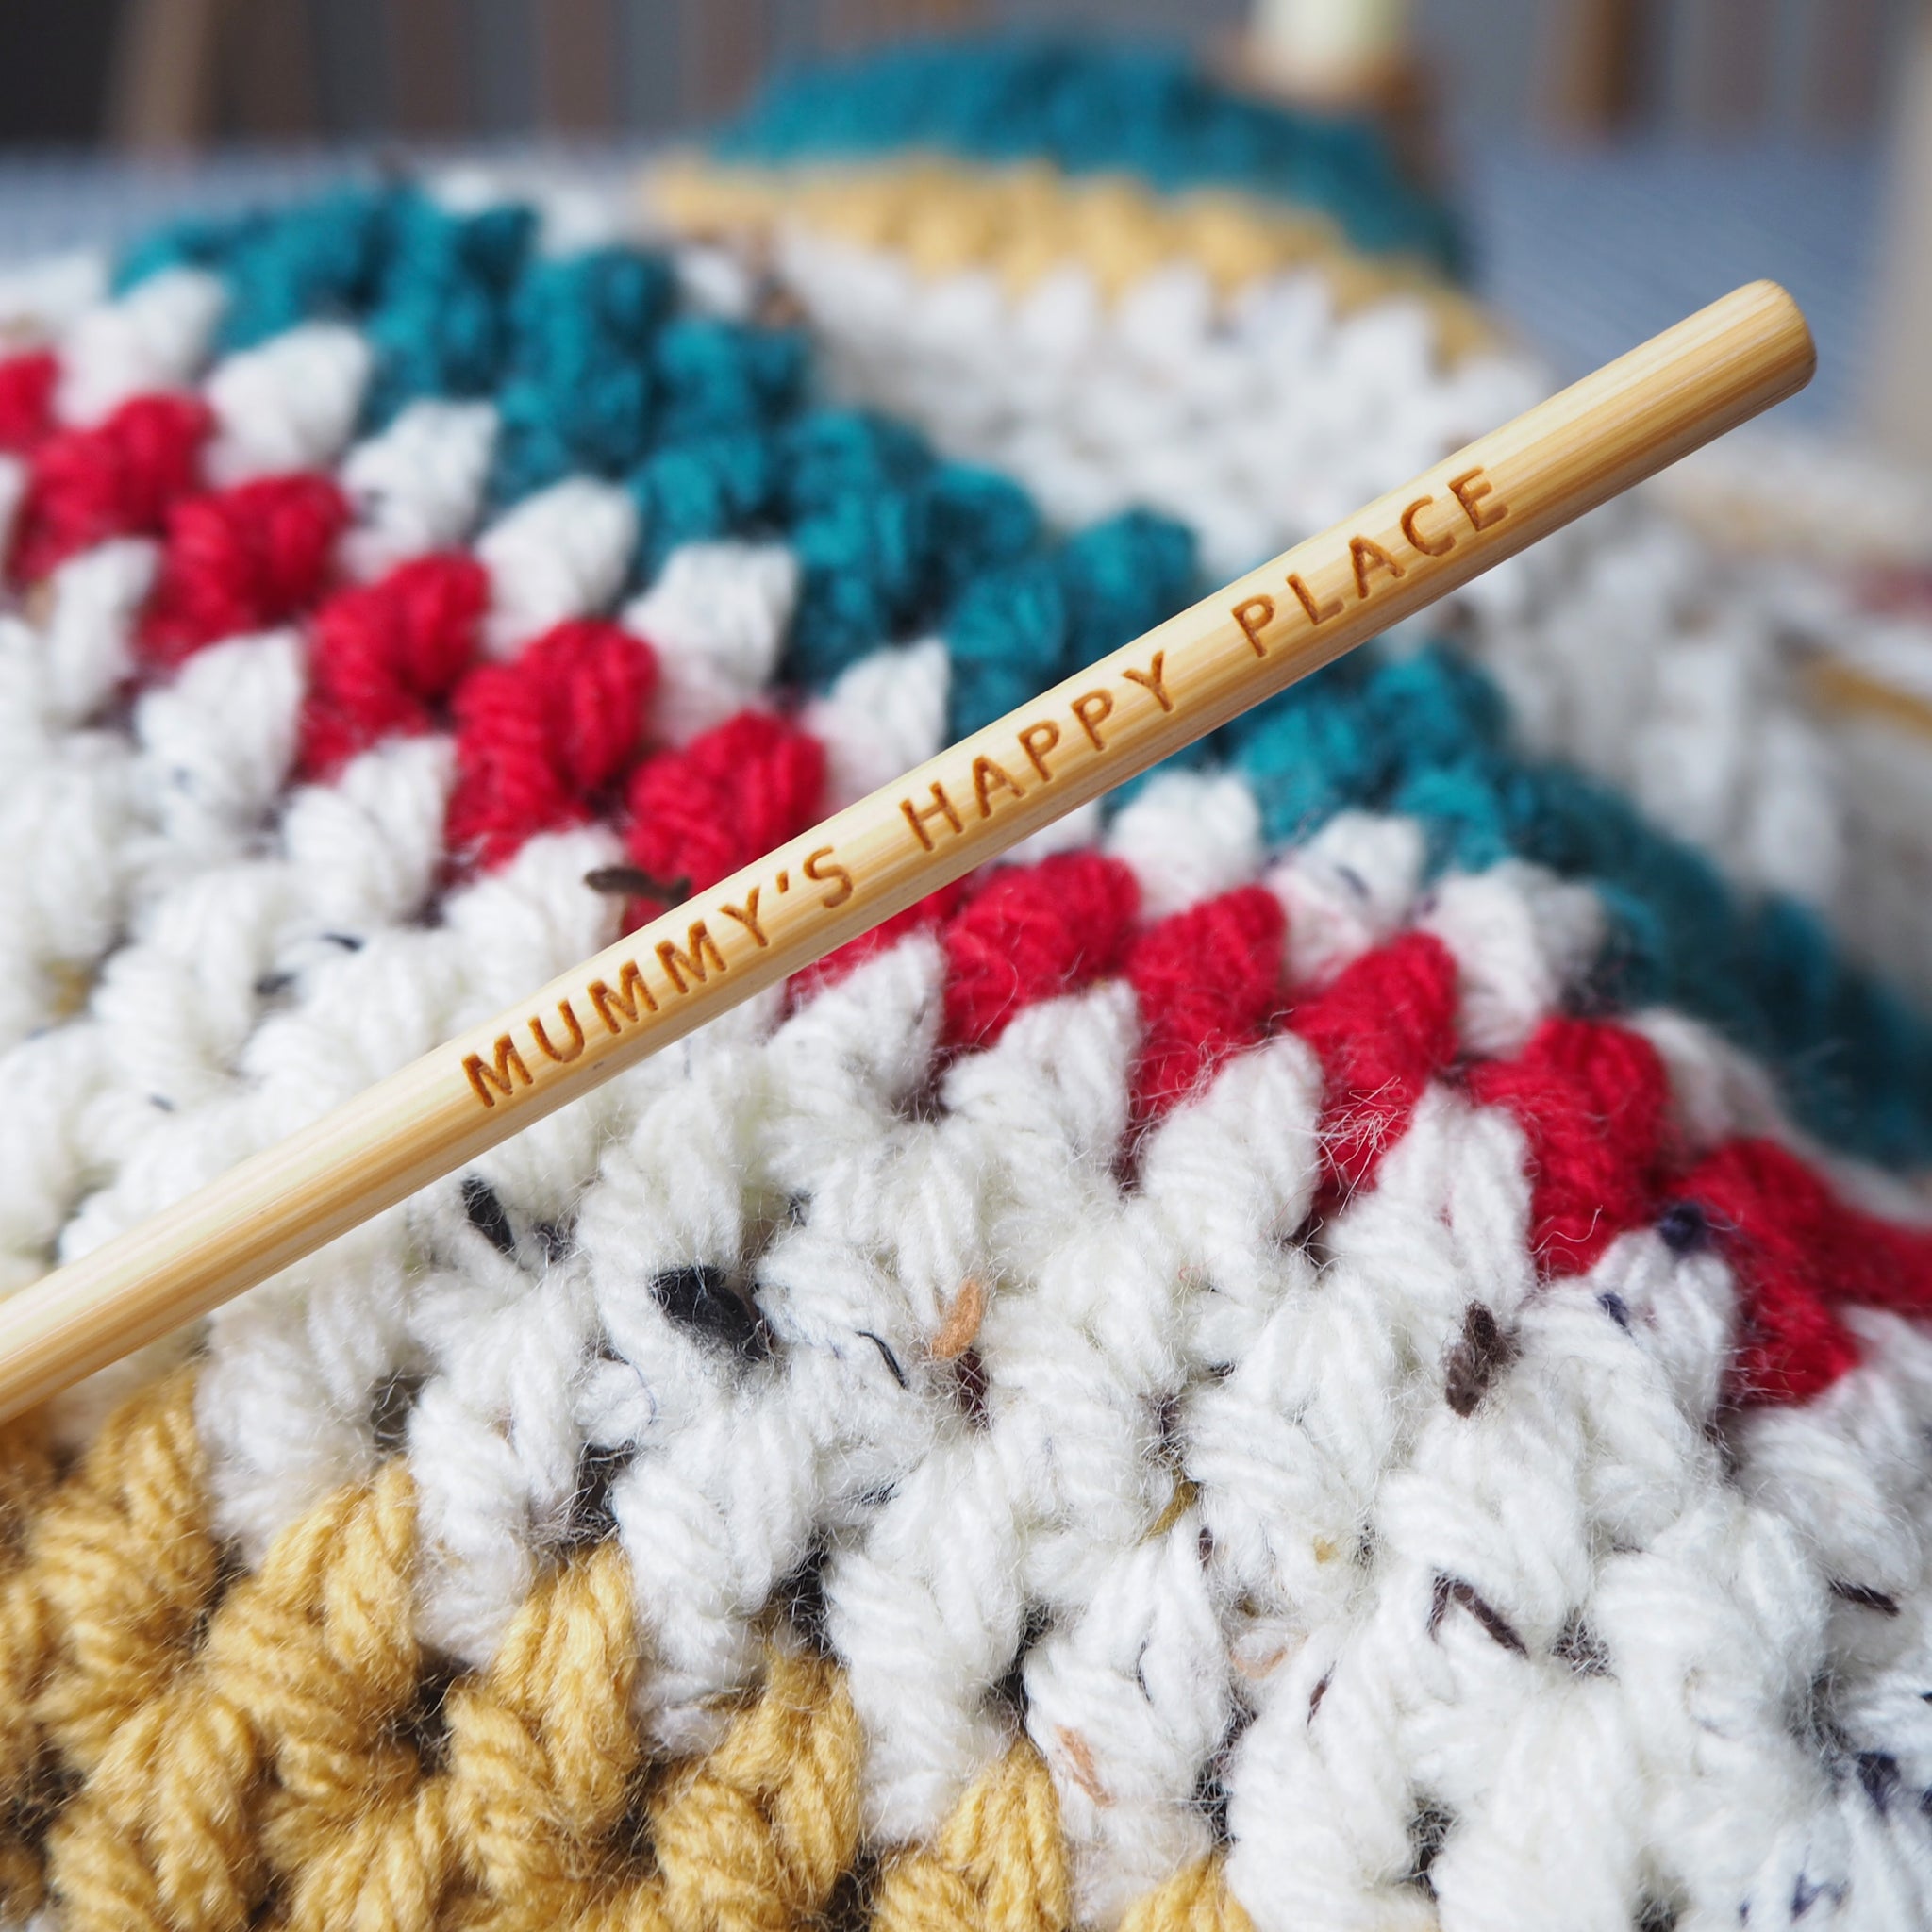 Happy Place Personalised Crochet Hook